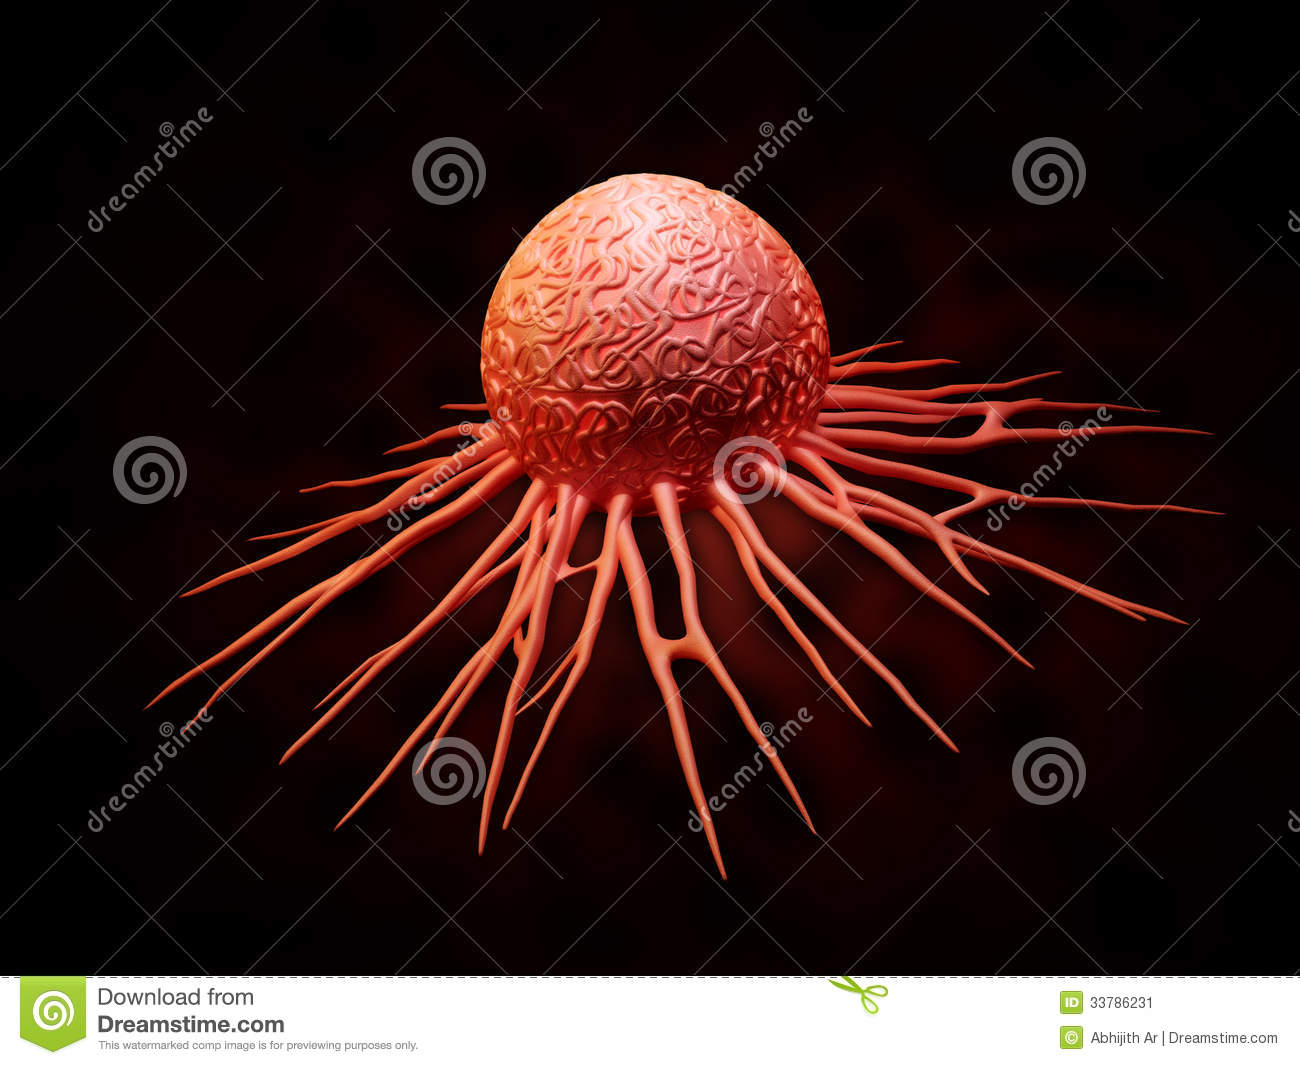 Cancer Cell Stock Image   Image  33786231